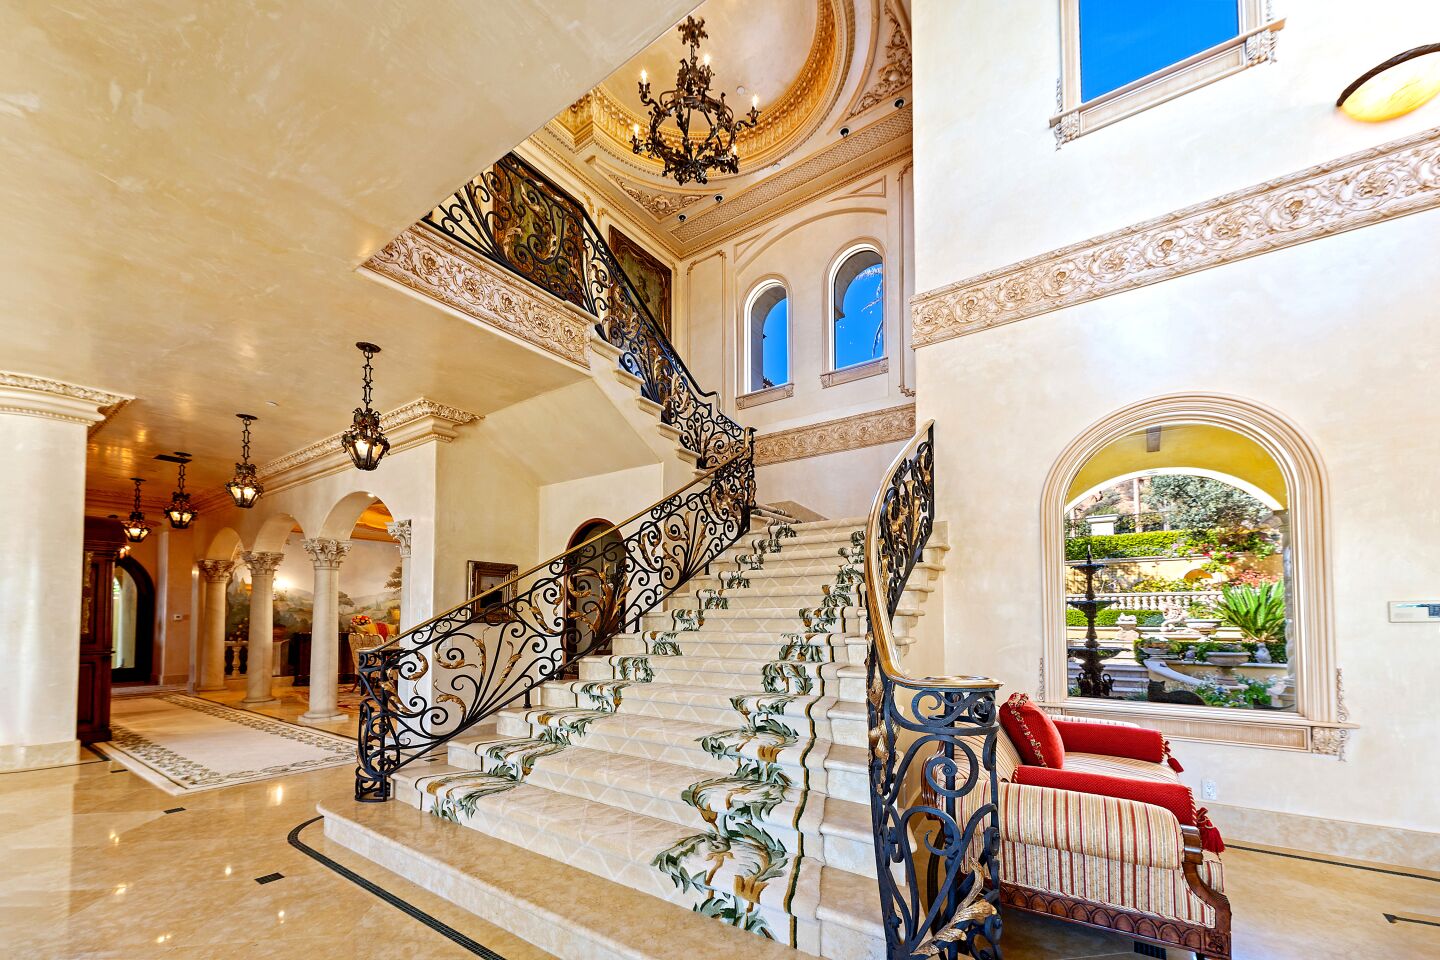 A dramatic banister and chandelier on a staircase leading to the second floor.